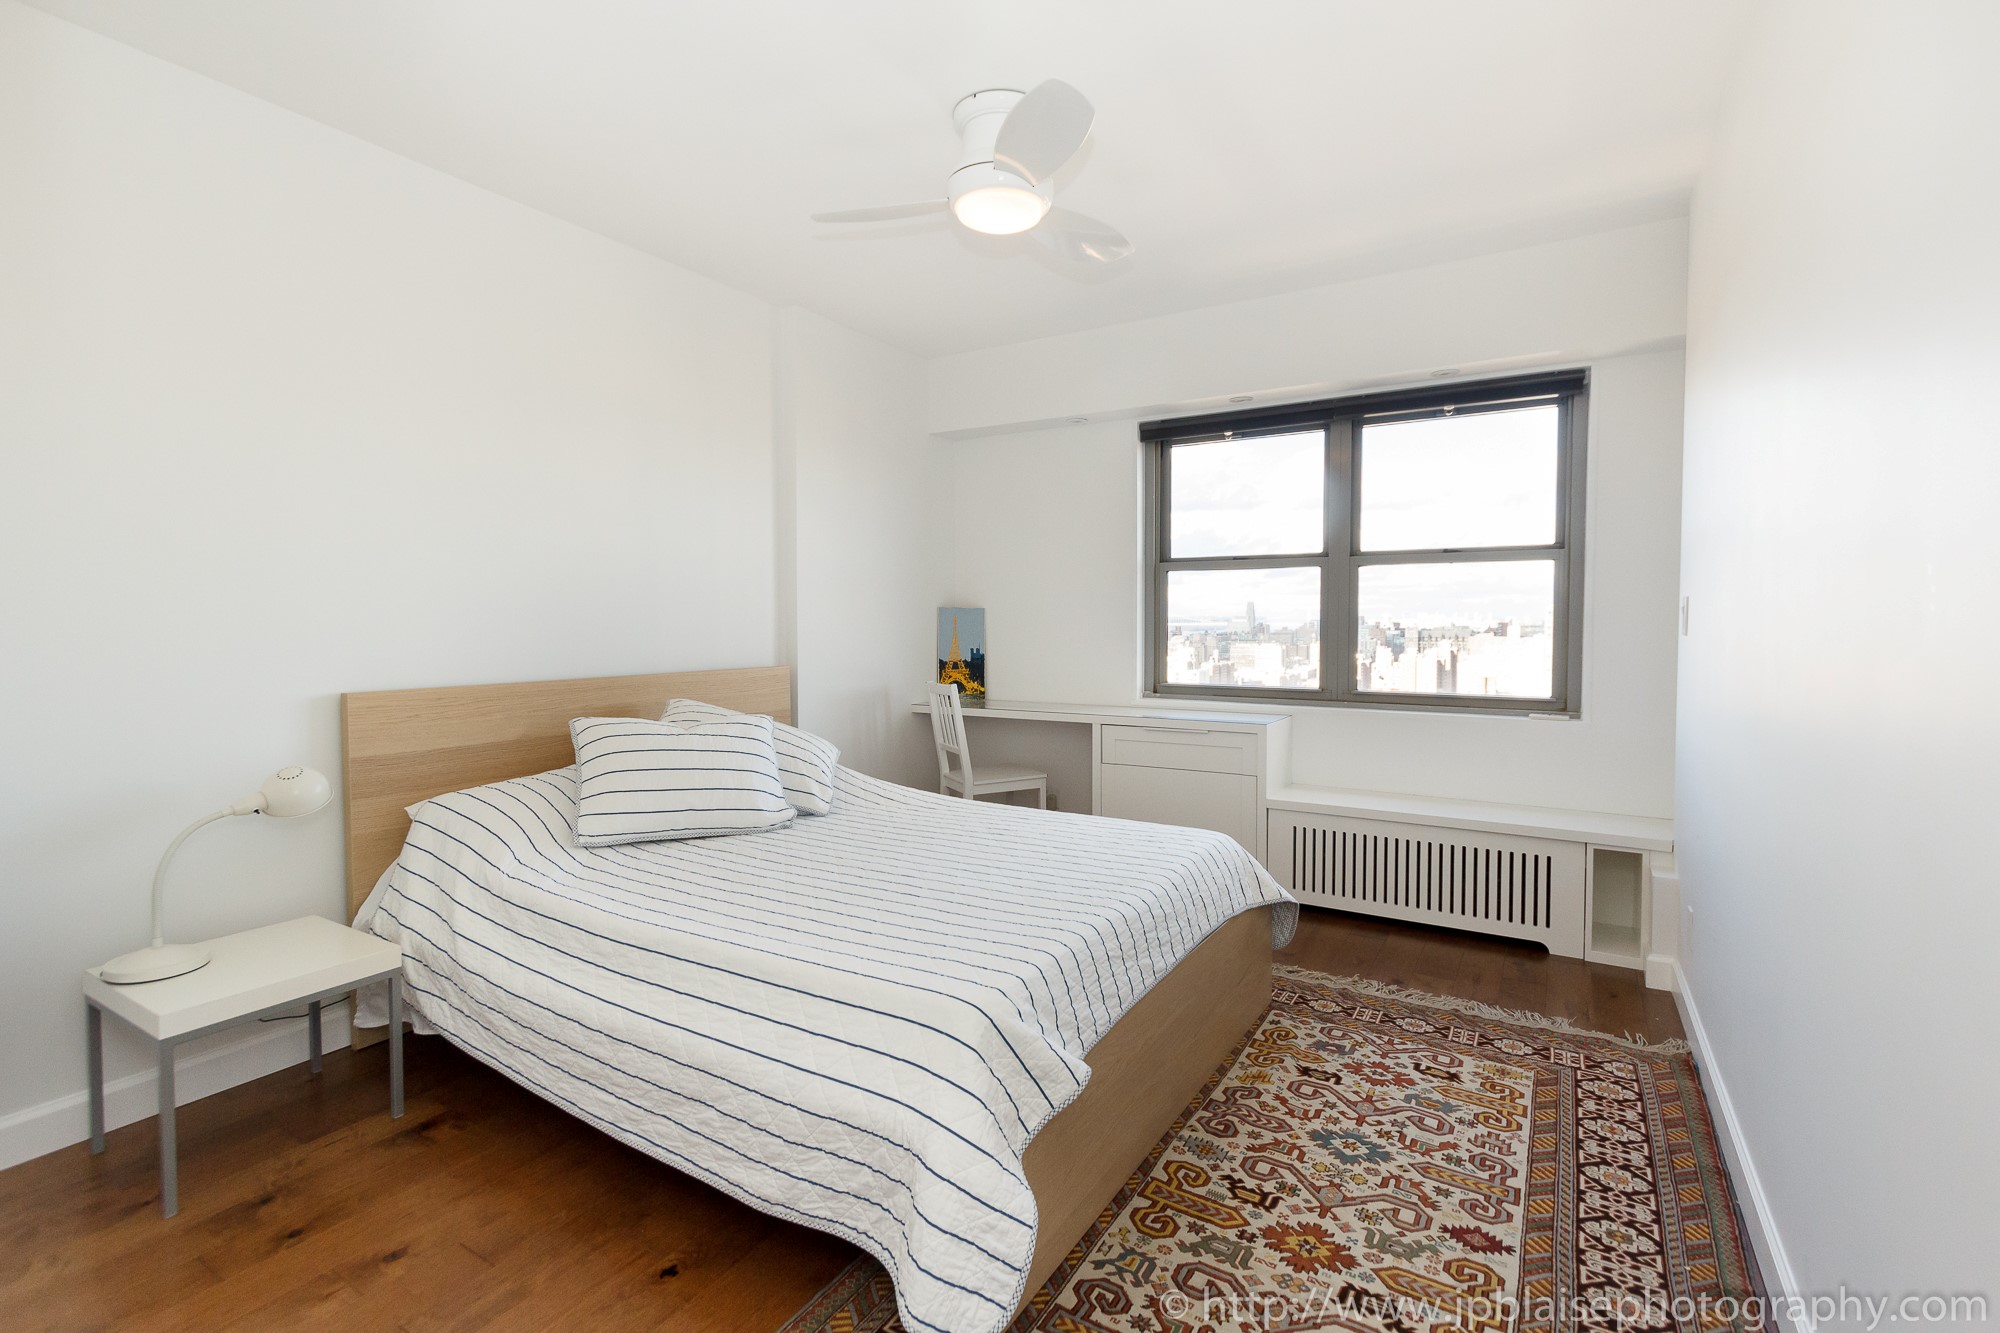 apartment photographer new york nyc one bedroom with terrace upper west side manhattan bedroom